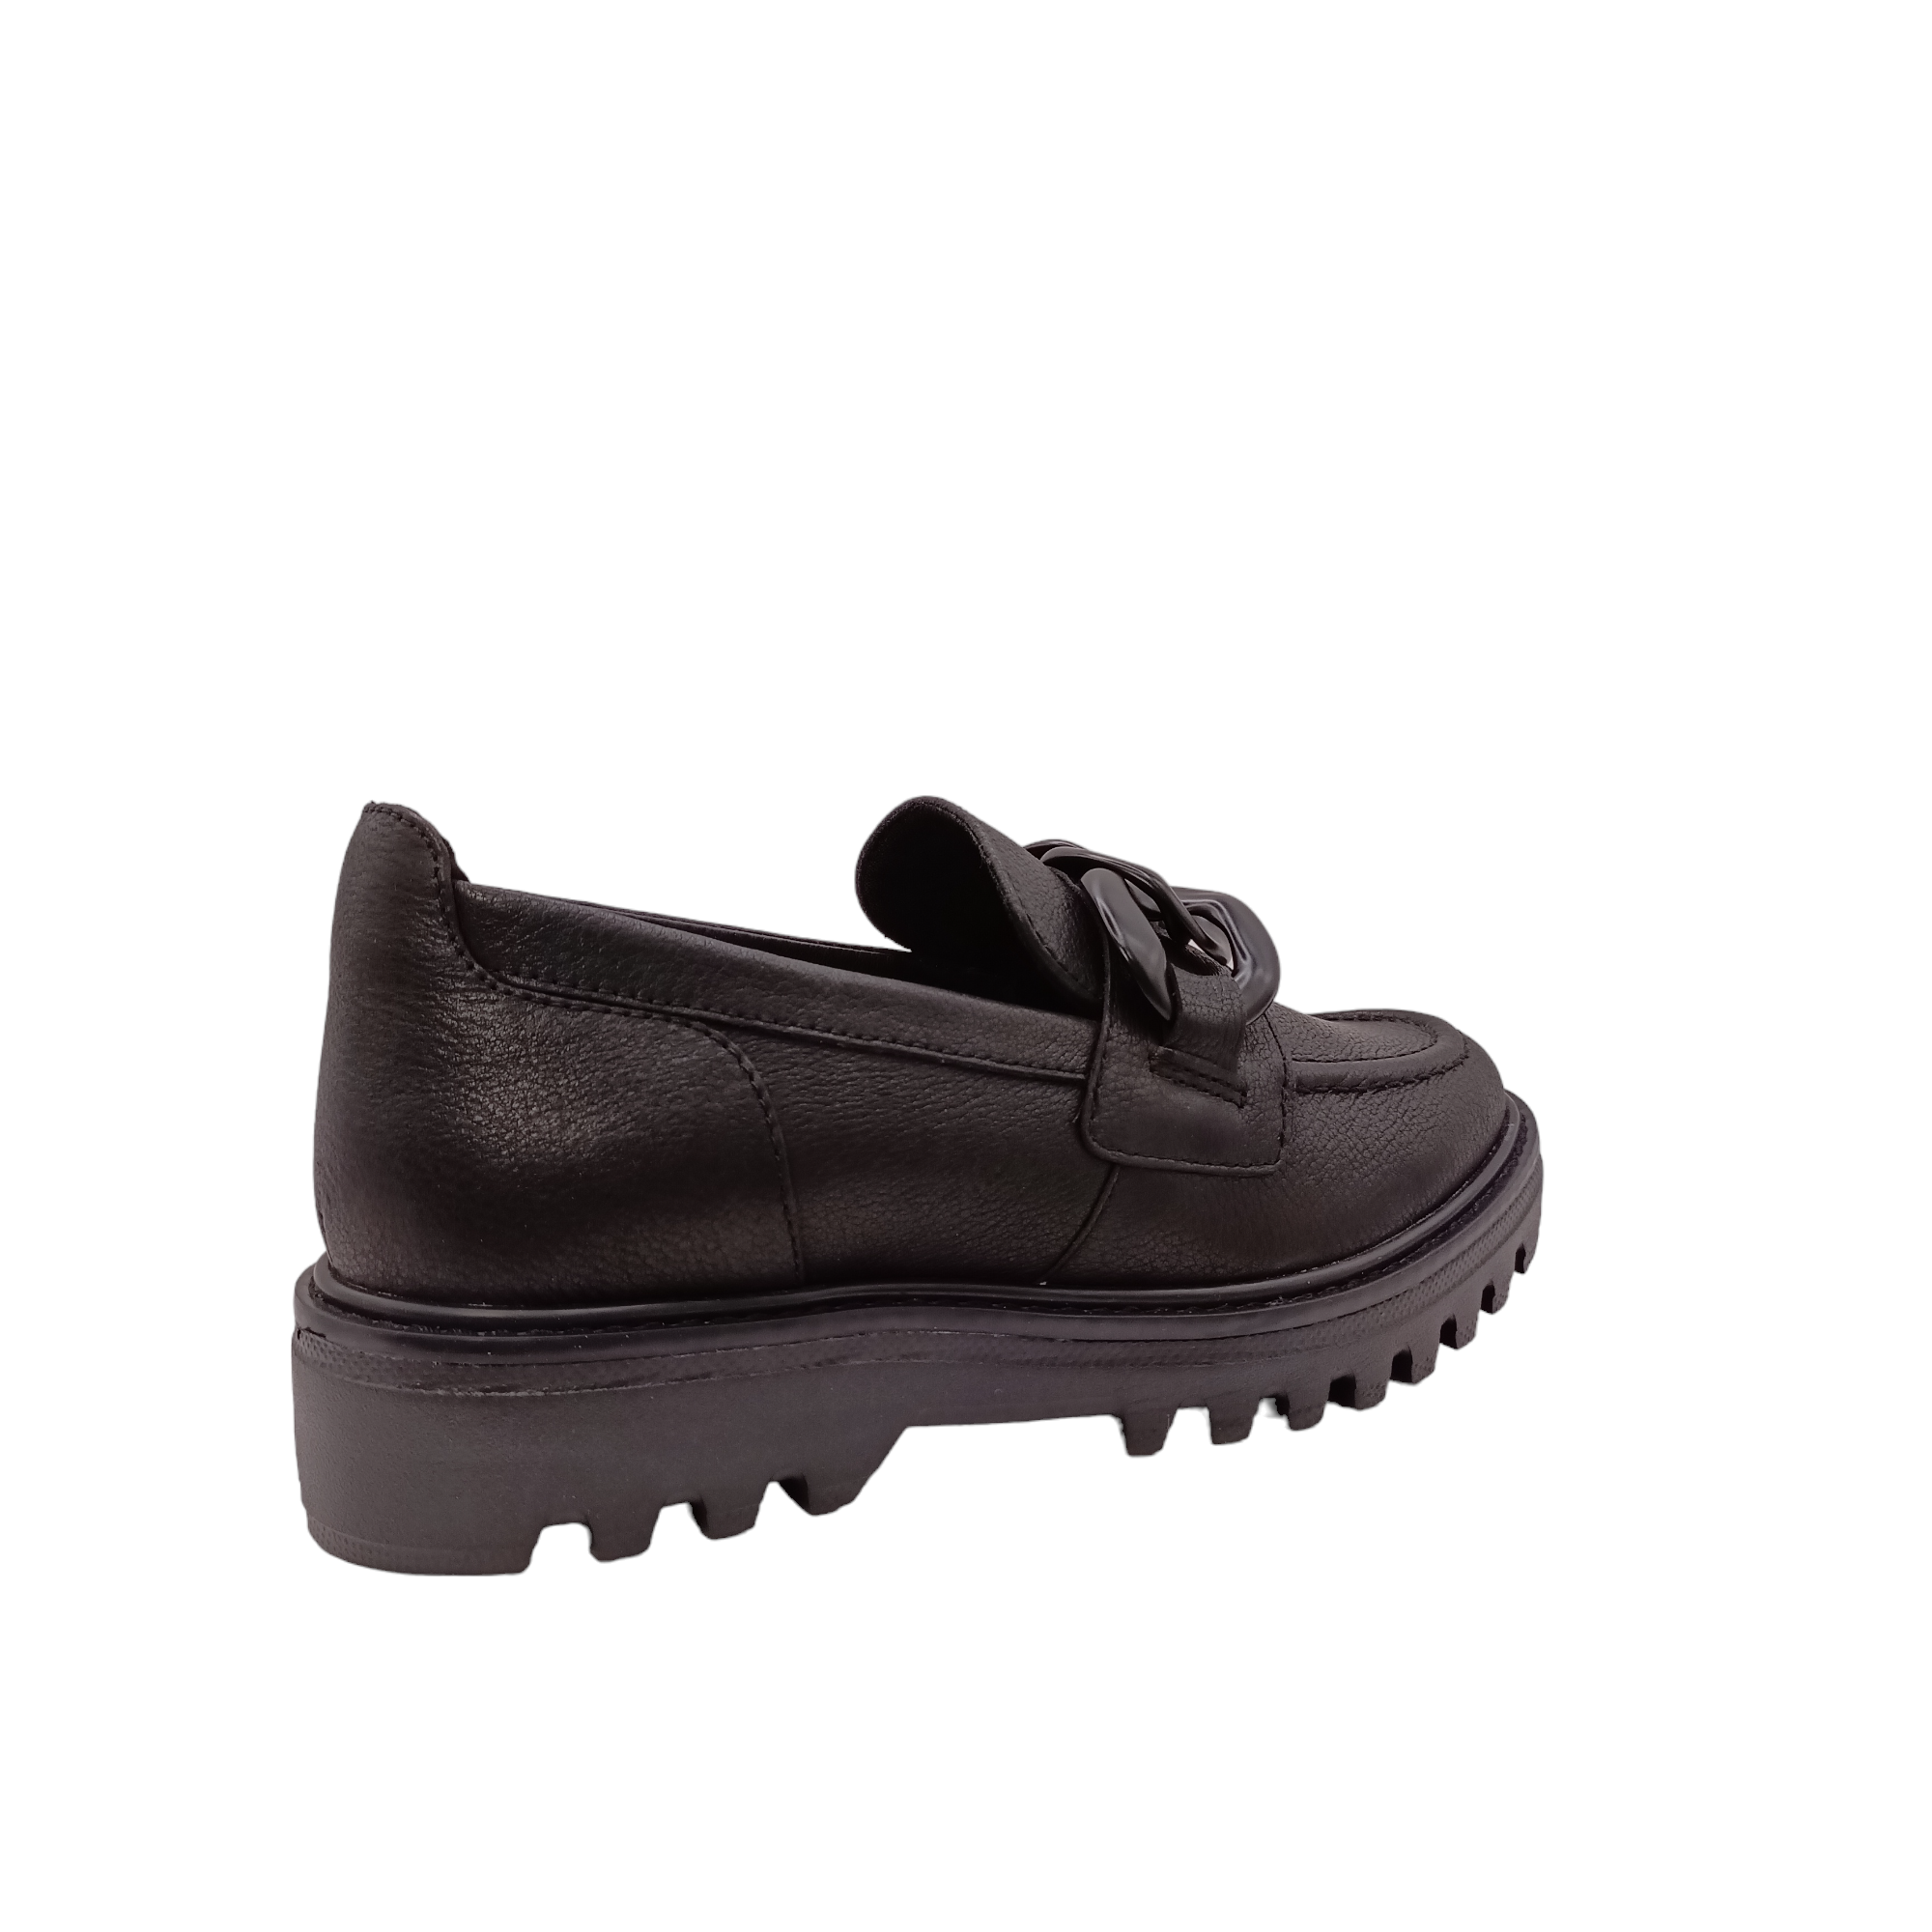 Shop Brooklyn Hush Puppies - with shoe&amp;me - from Hush Puppies - Shoes - Shoe, Winter, Womens - [collection]